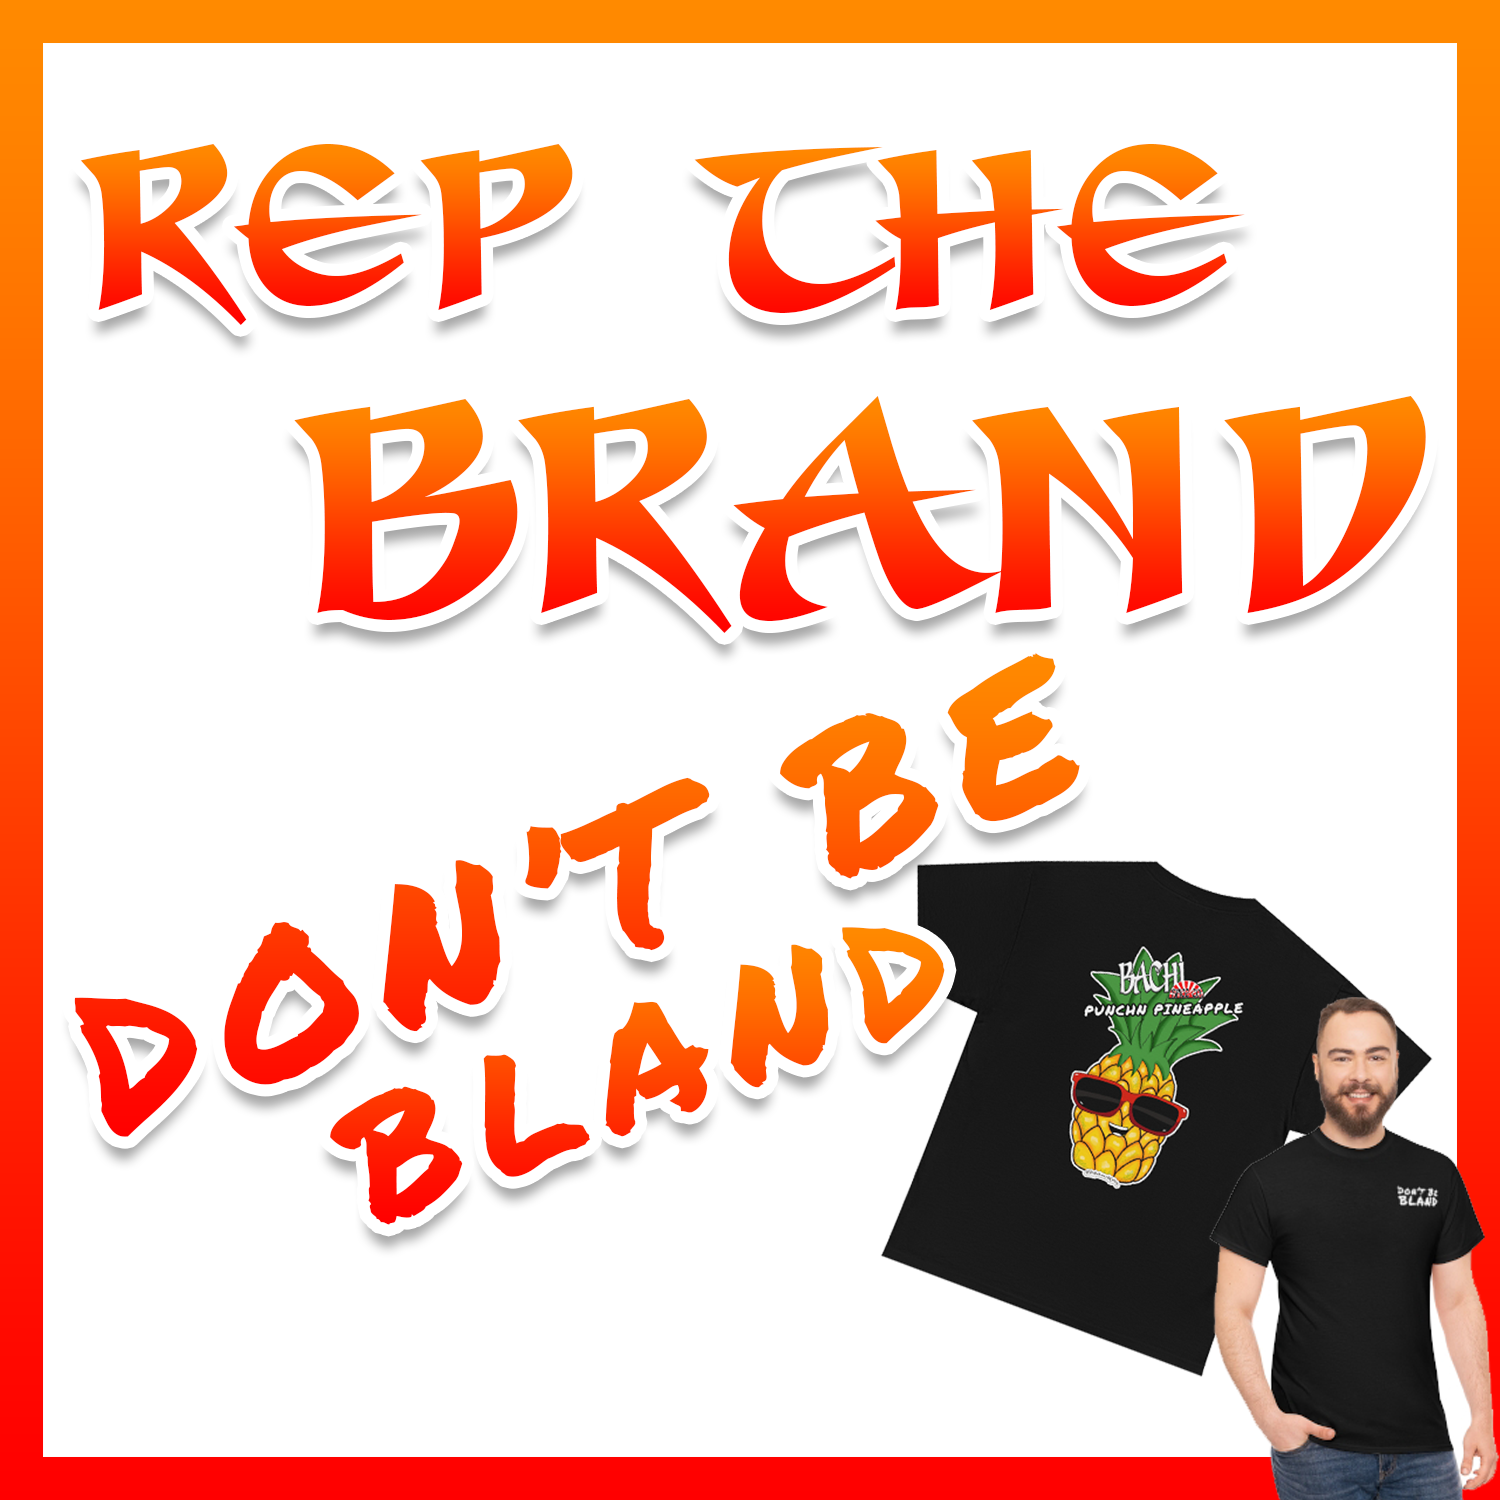 REP THE BRAND & DON'T BE BLAND!